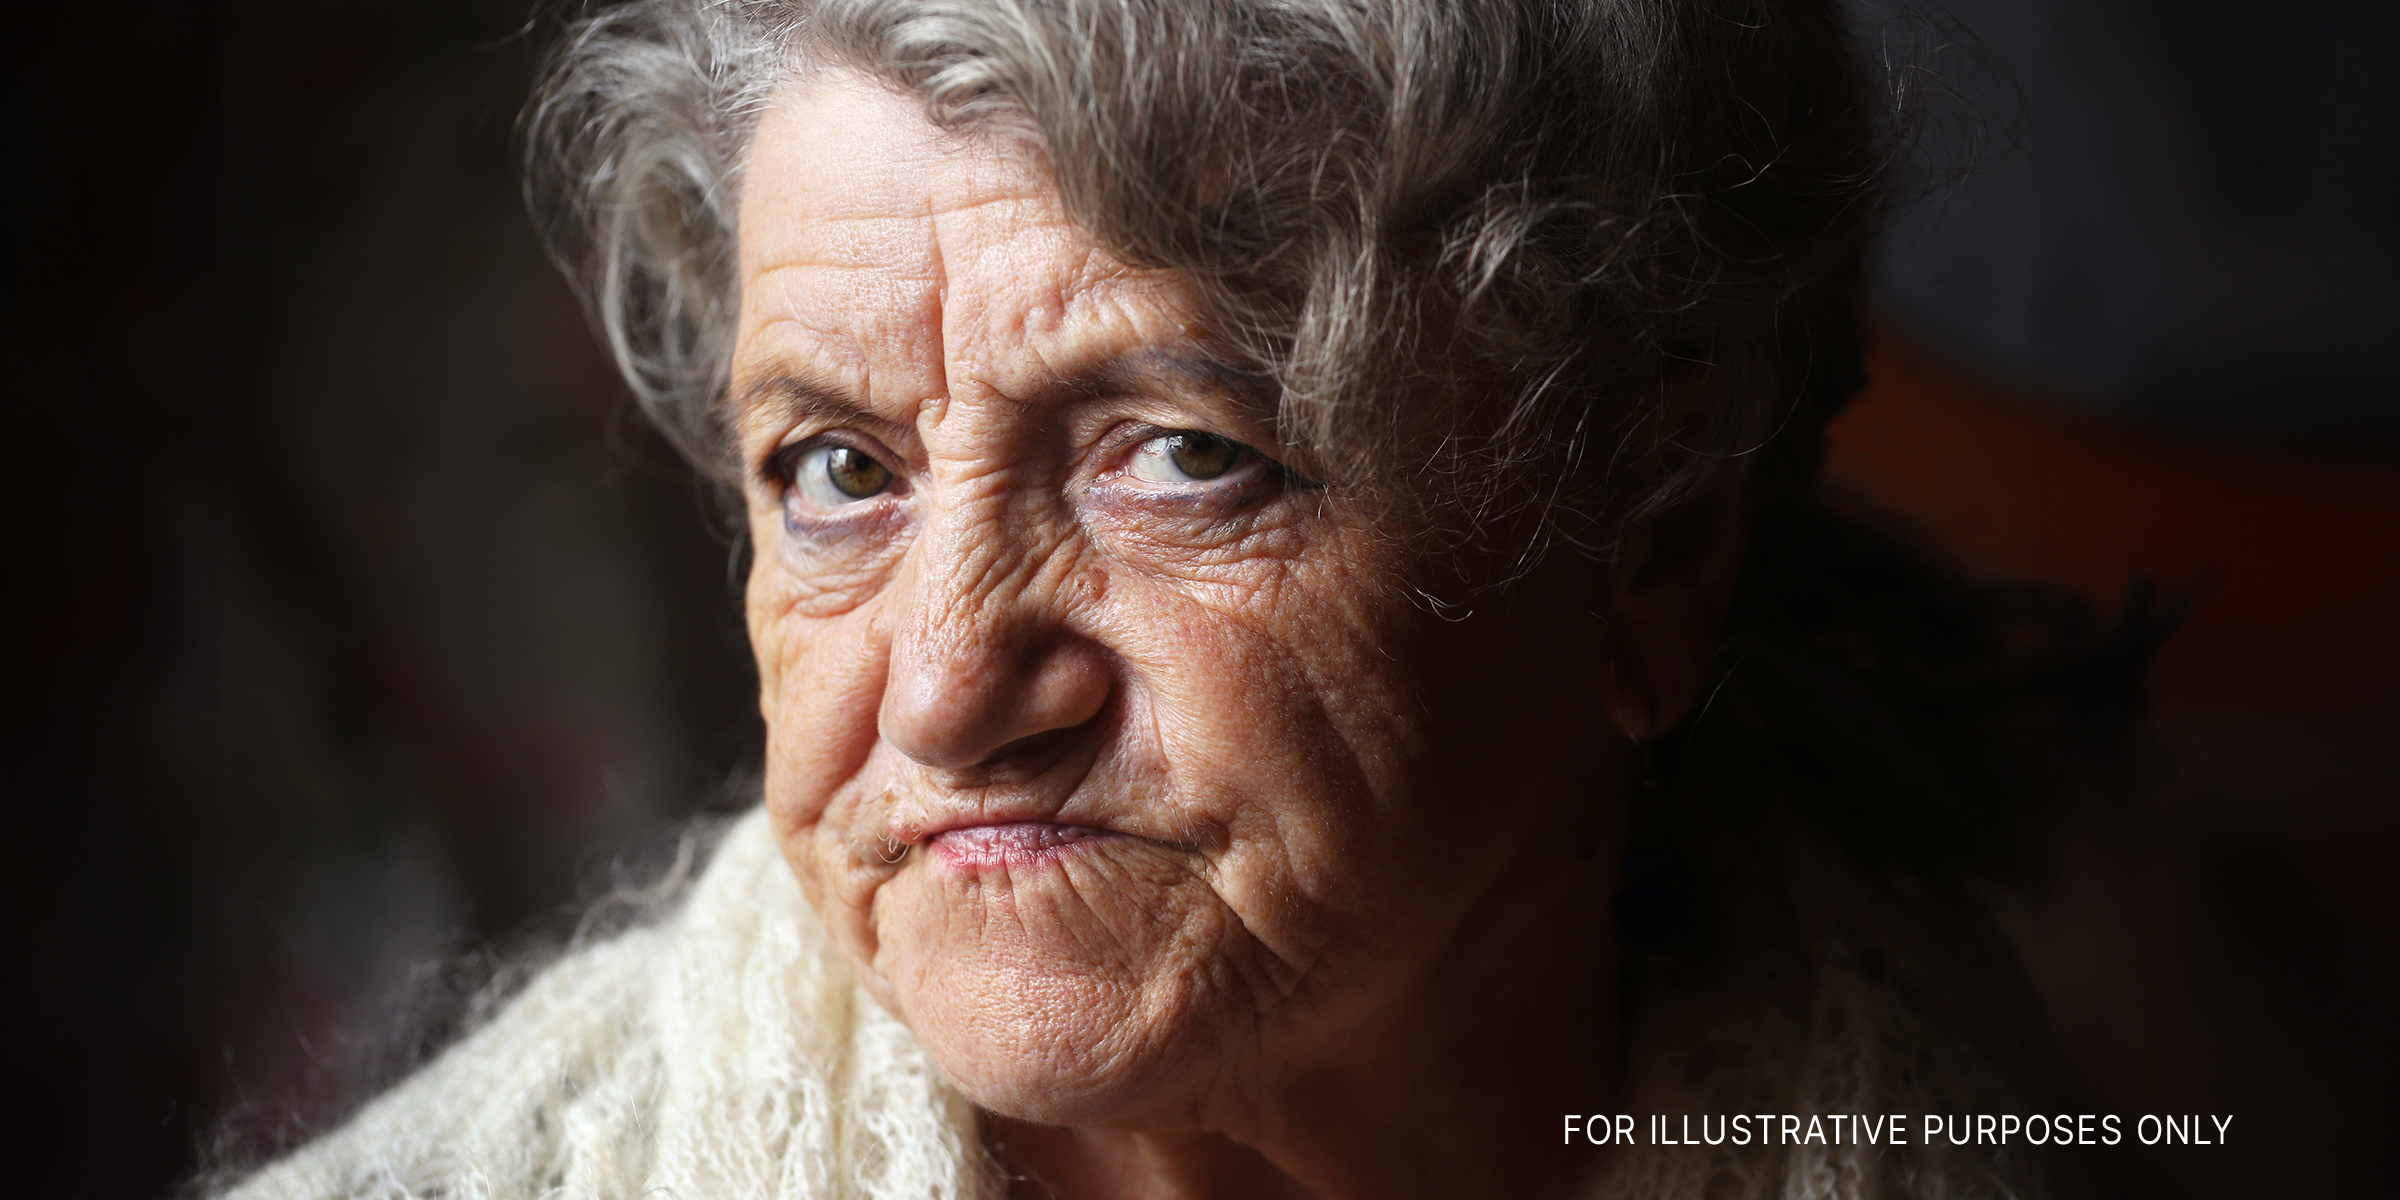 An angry older woman | Source: Shutterstock